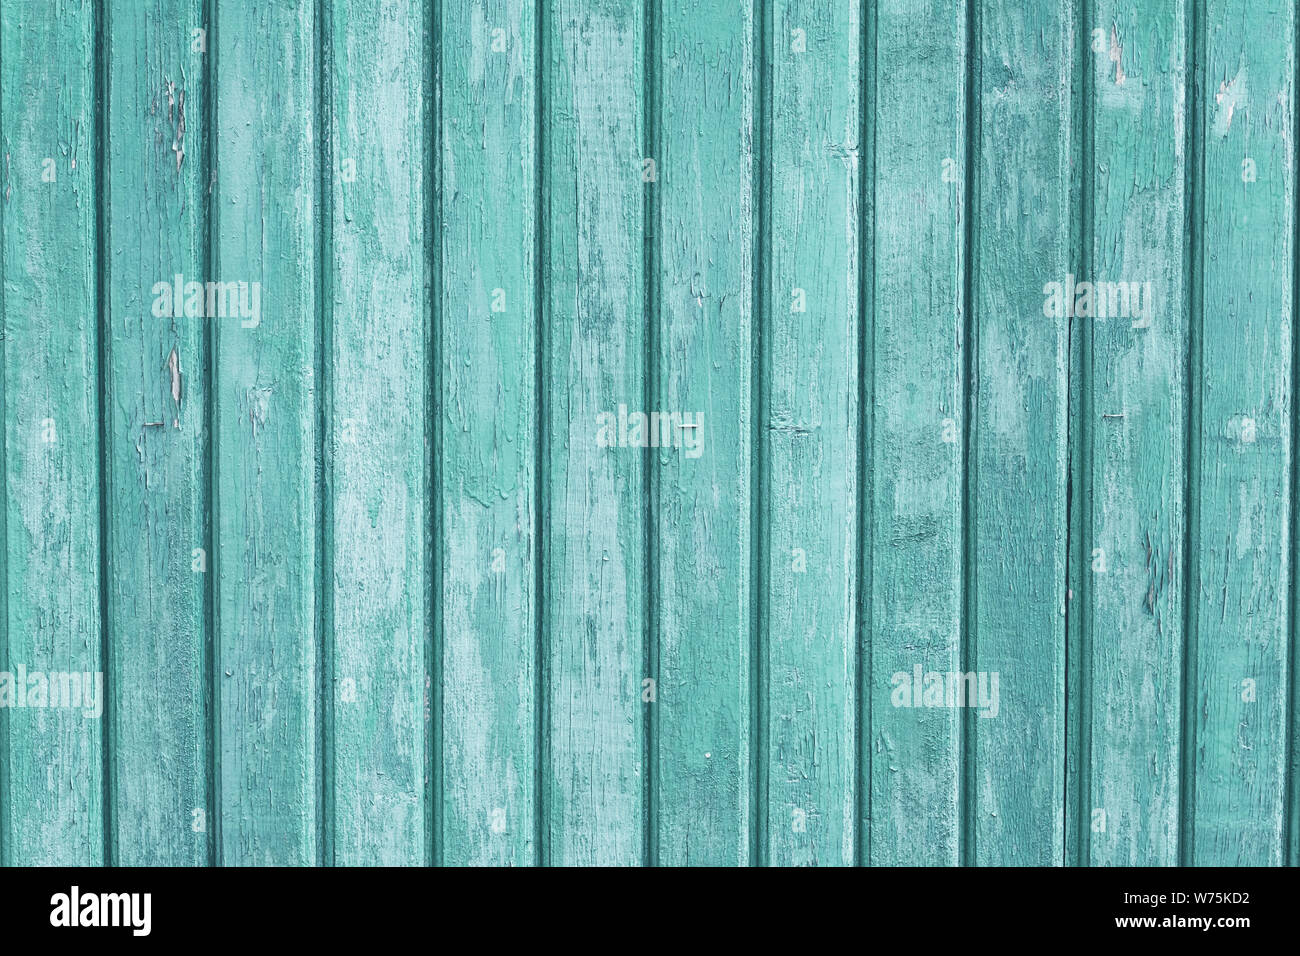 Turquoise wooden fence background. Vertical old wood planks, light green shabby surface. Oak timber wall texture. Copy space. Vintage boards. Stock Photo